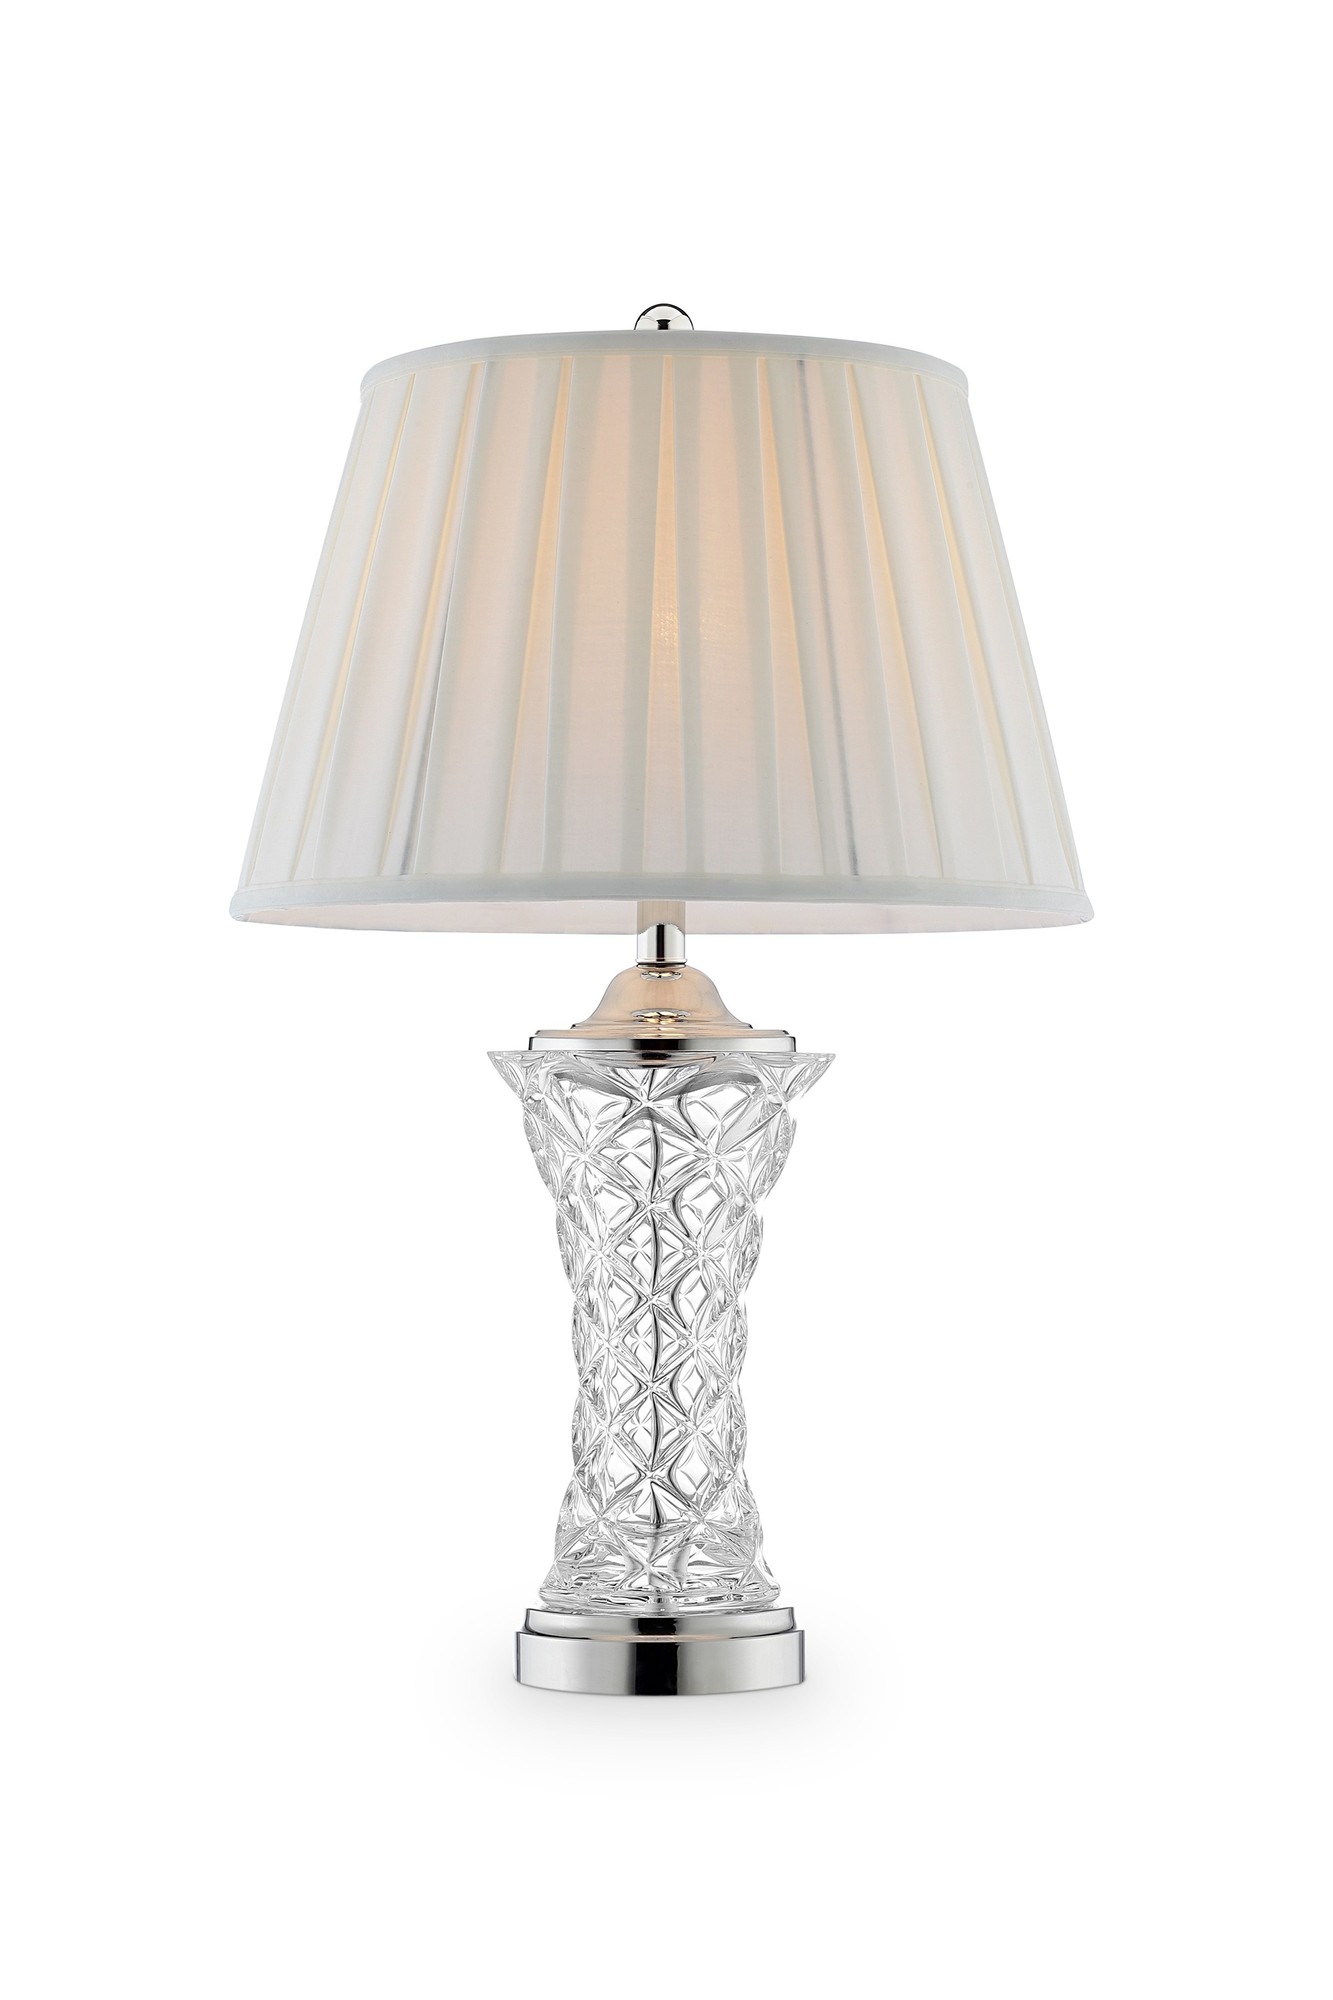 Ornamental Glass Table Lamp with White Ruffle Shade